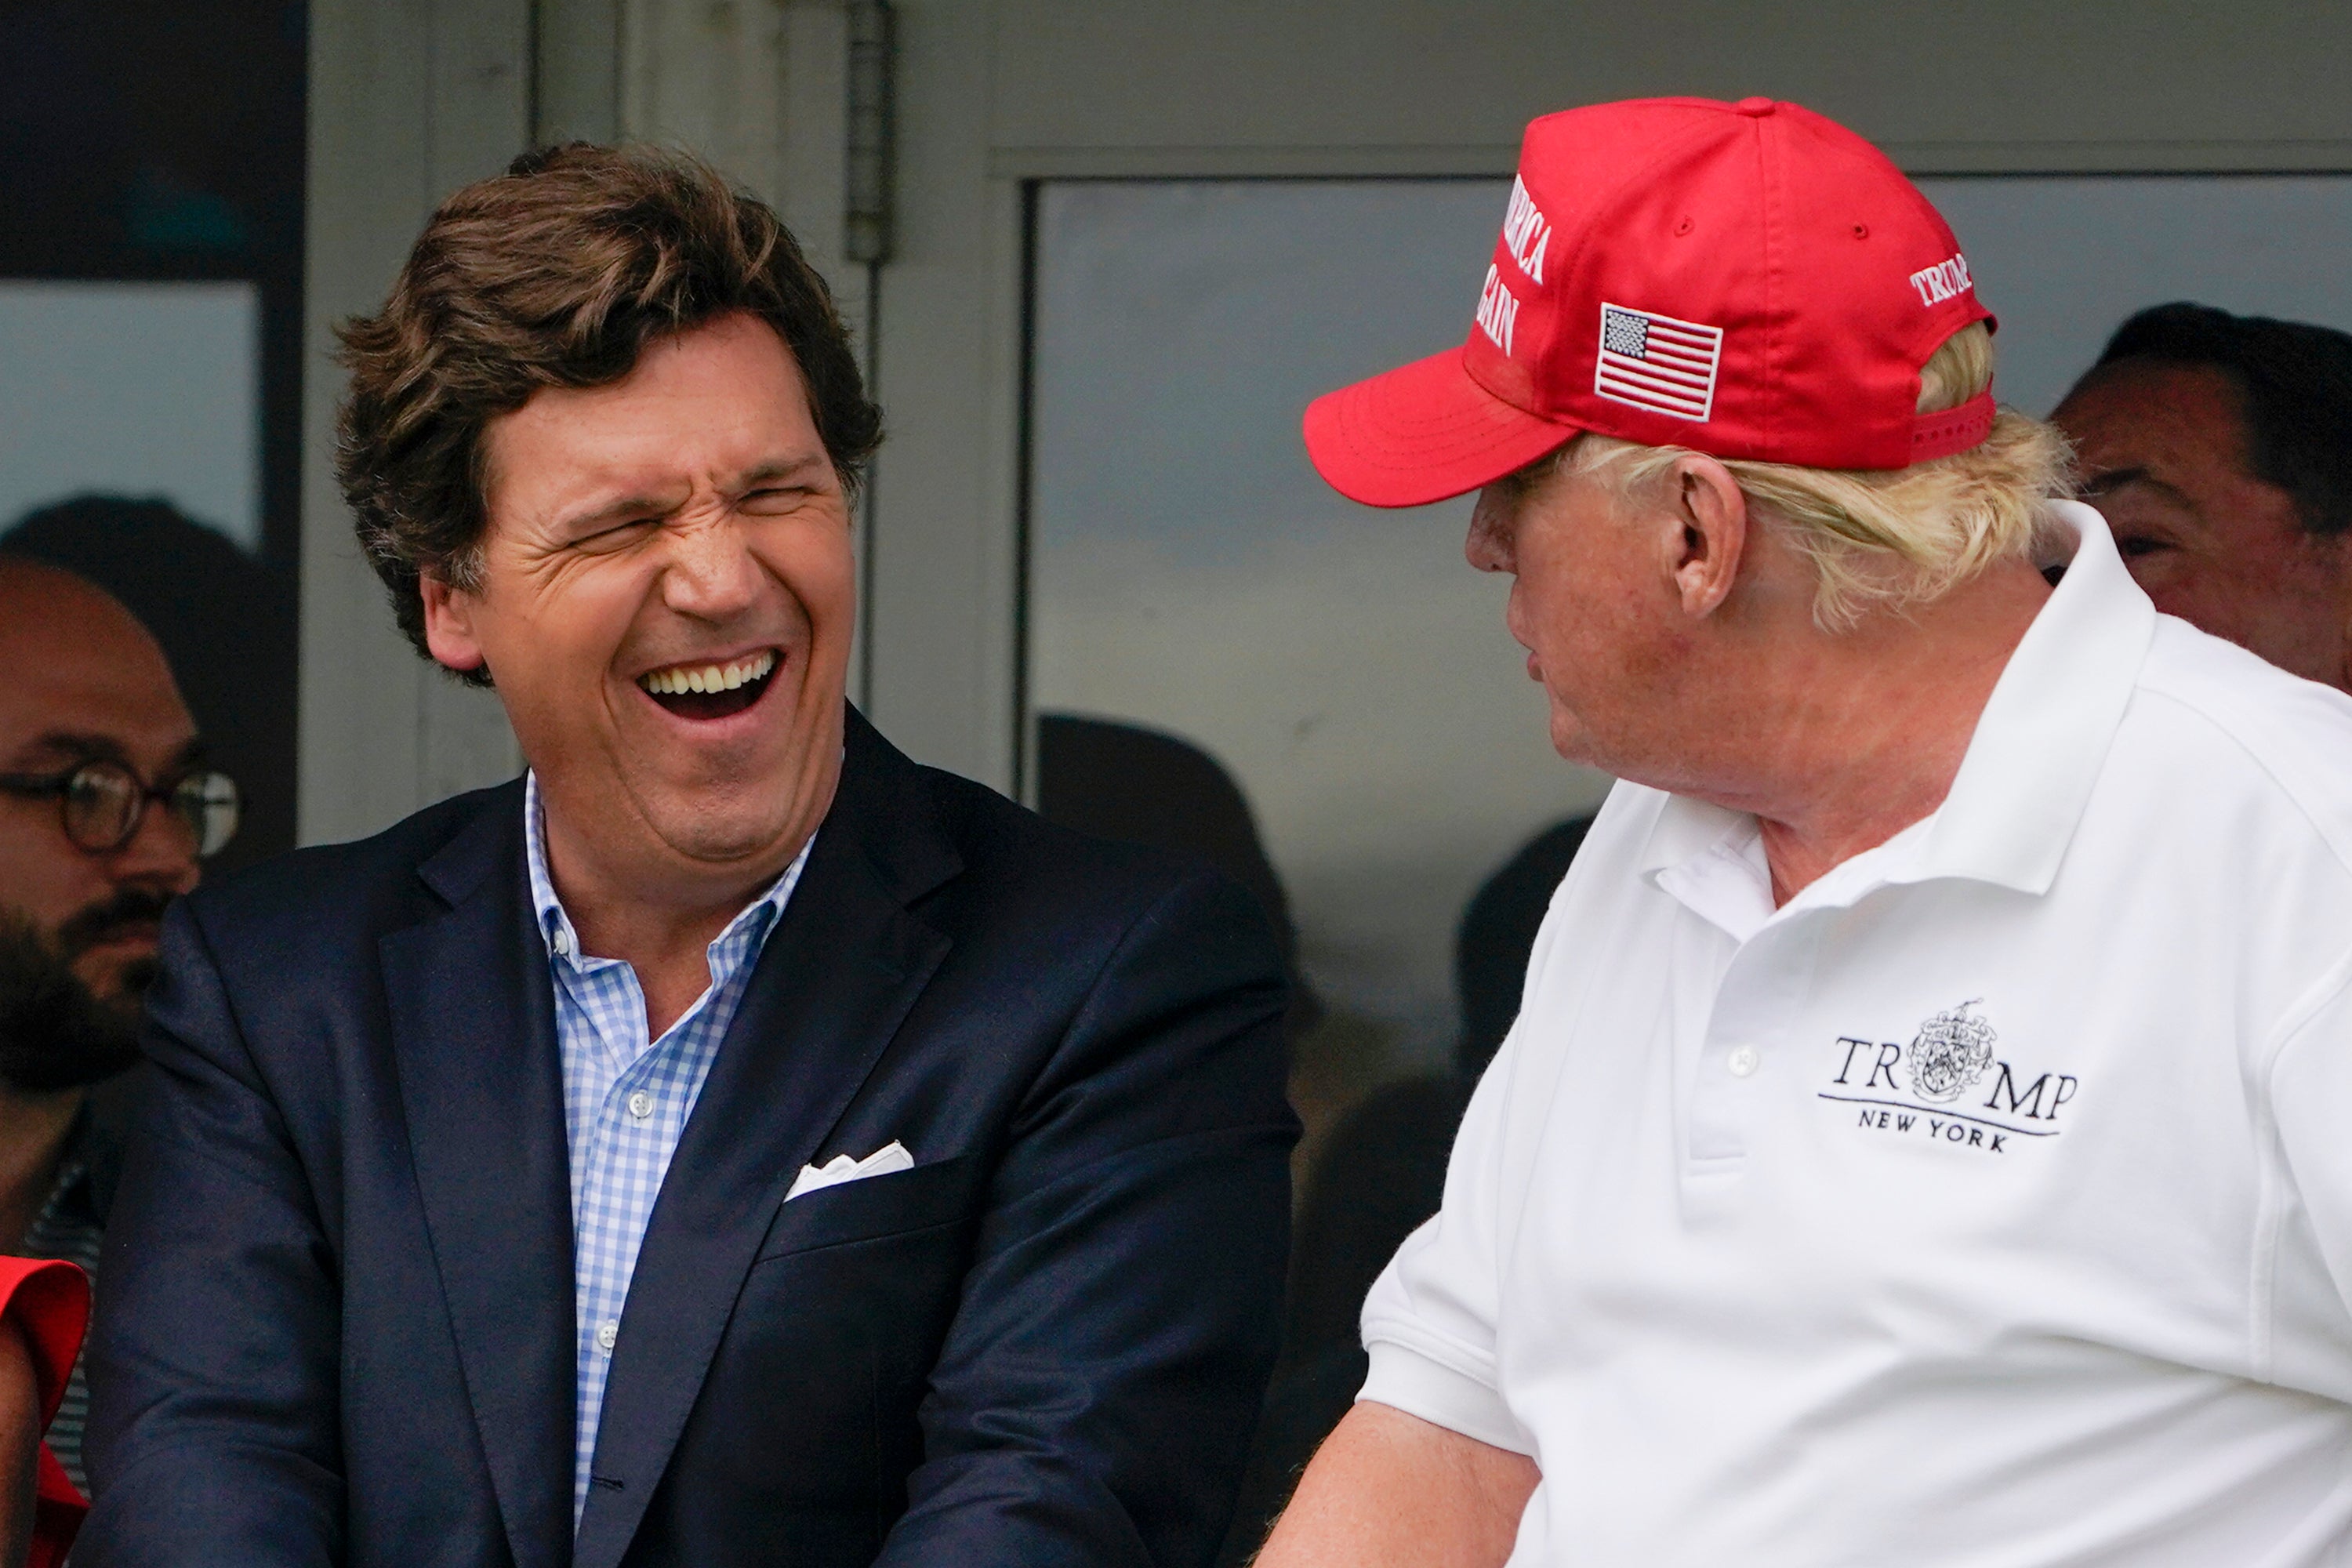 Tucker Carlson, left, and former President Donald Trump at the Bedminster Invitational LIV Golf tournament in Bedminster, New Jersey, on July 31, 2022